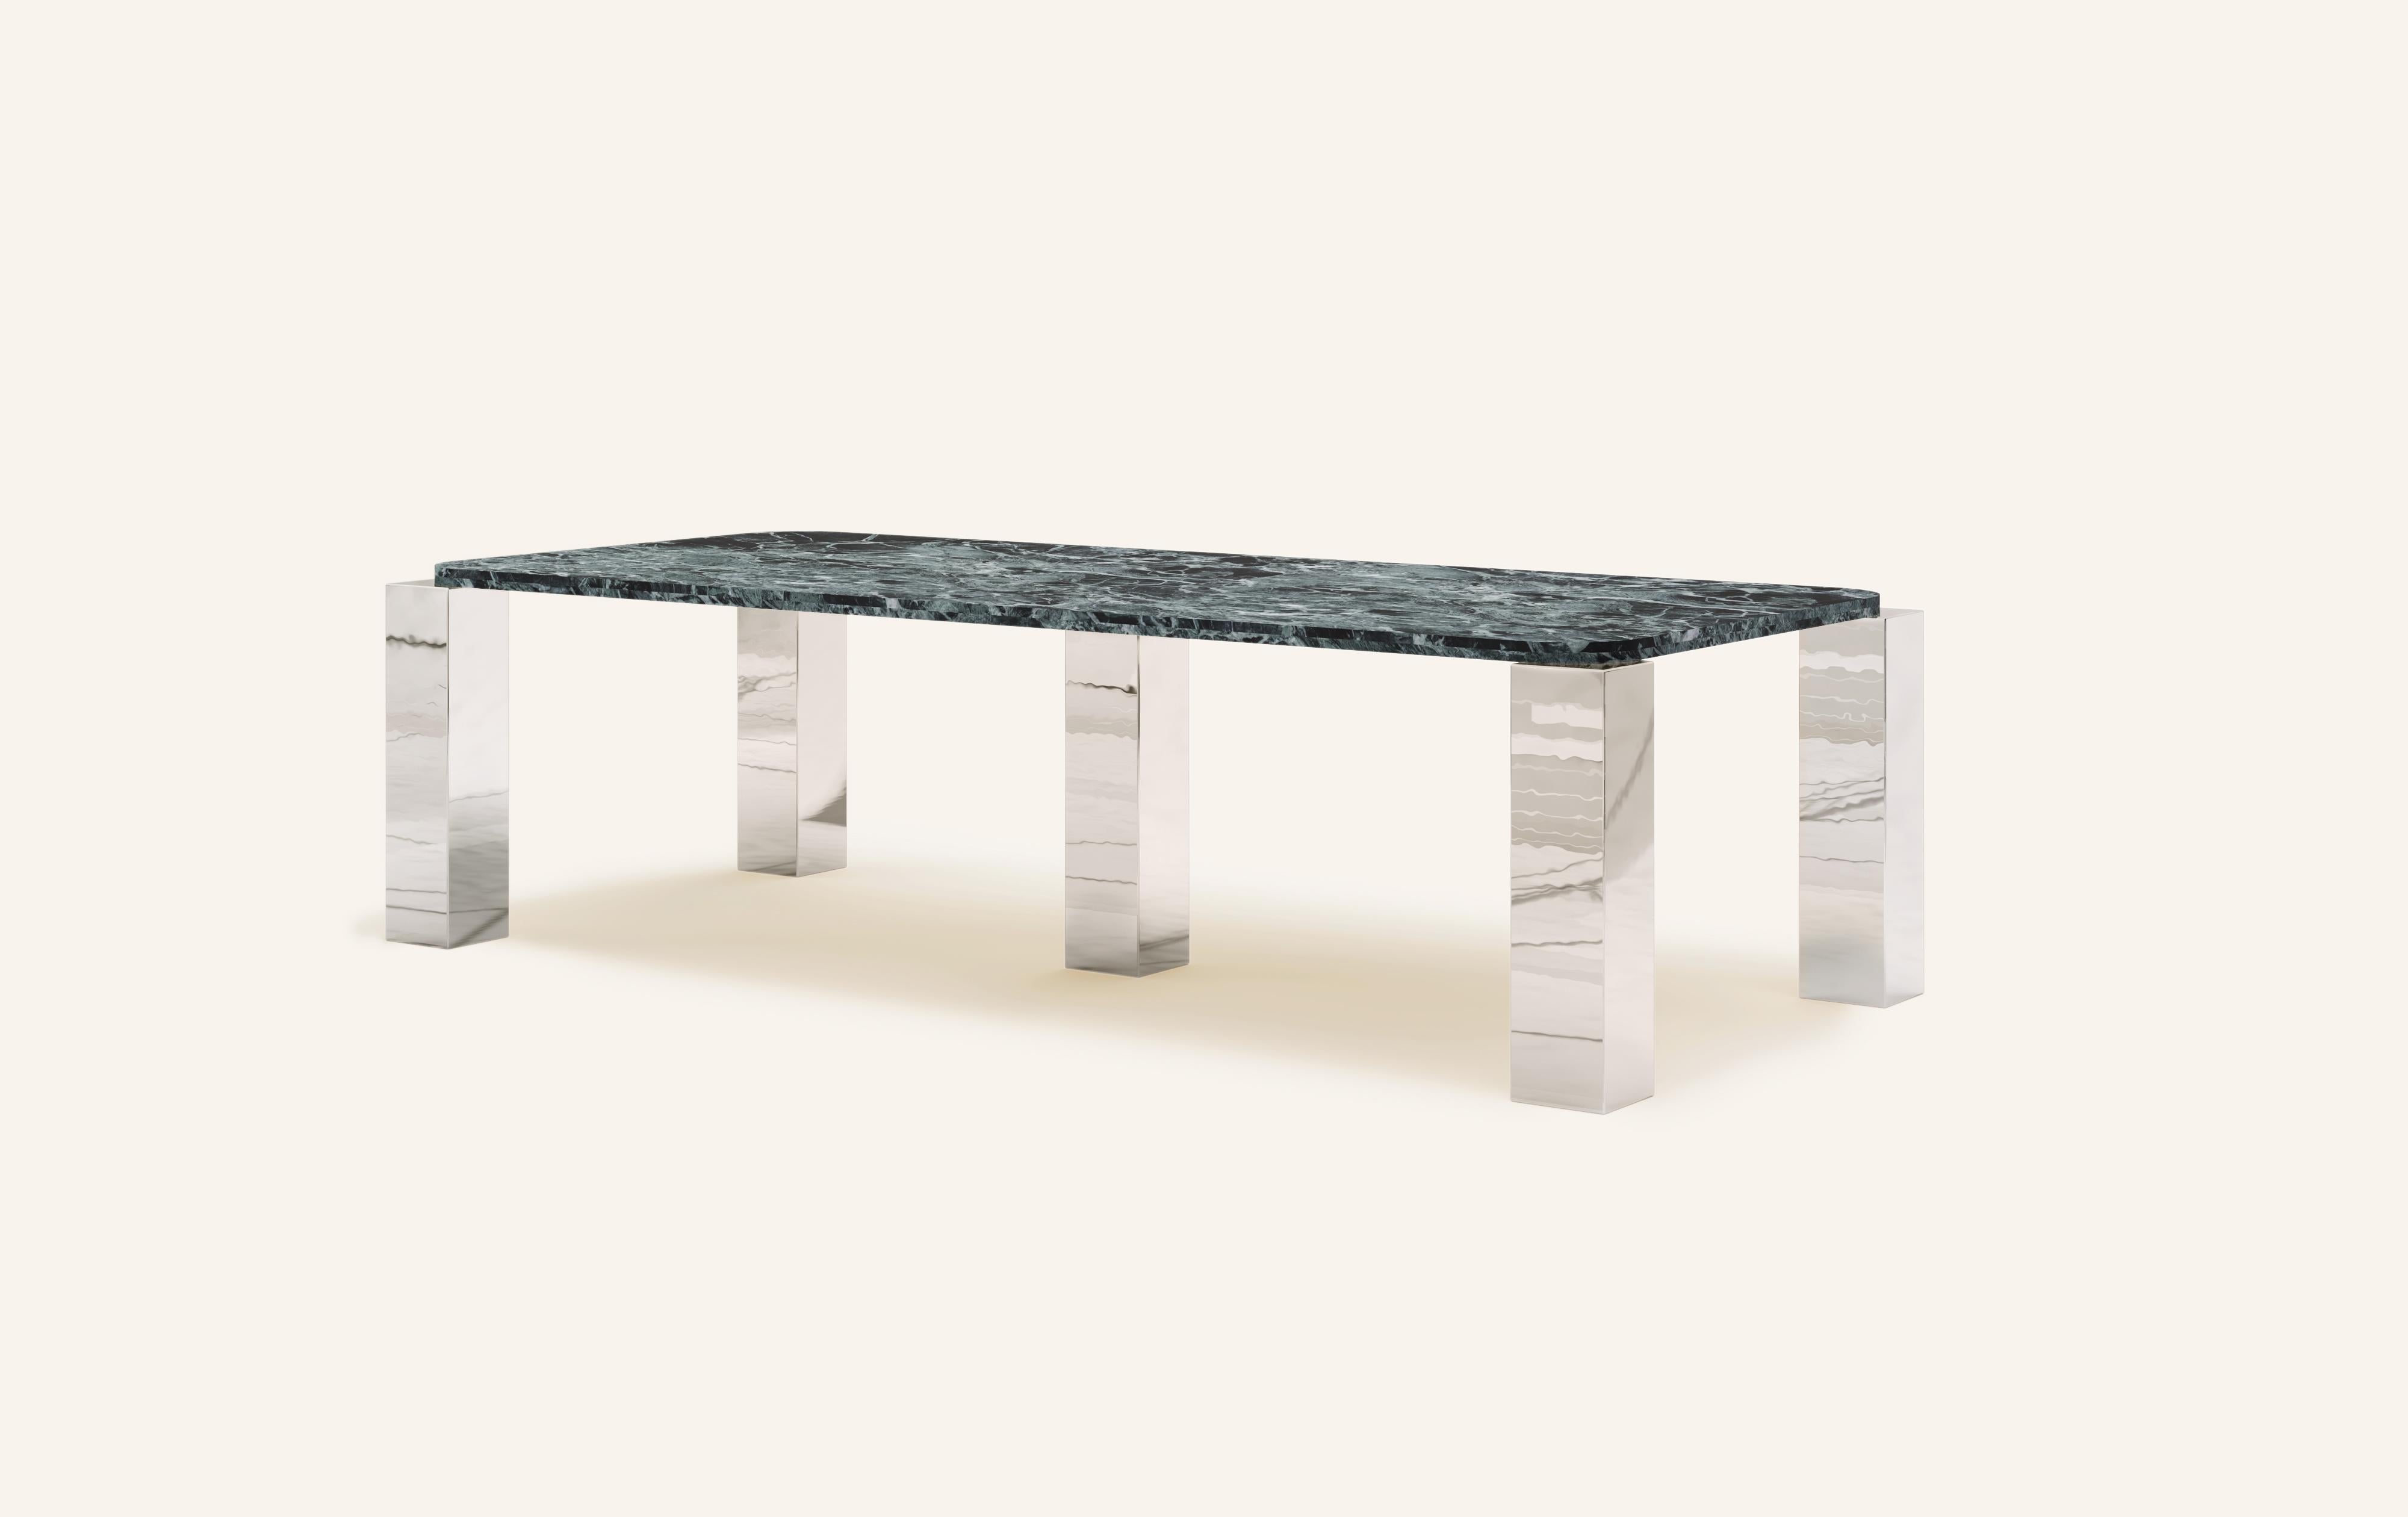 Organic Modern FORM(LA) Cubo Rectangle Dining Table 86”L x 44”W x 30”H Verde Marble & Chrome For Sale